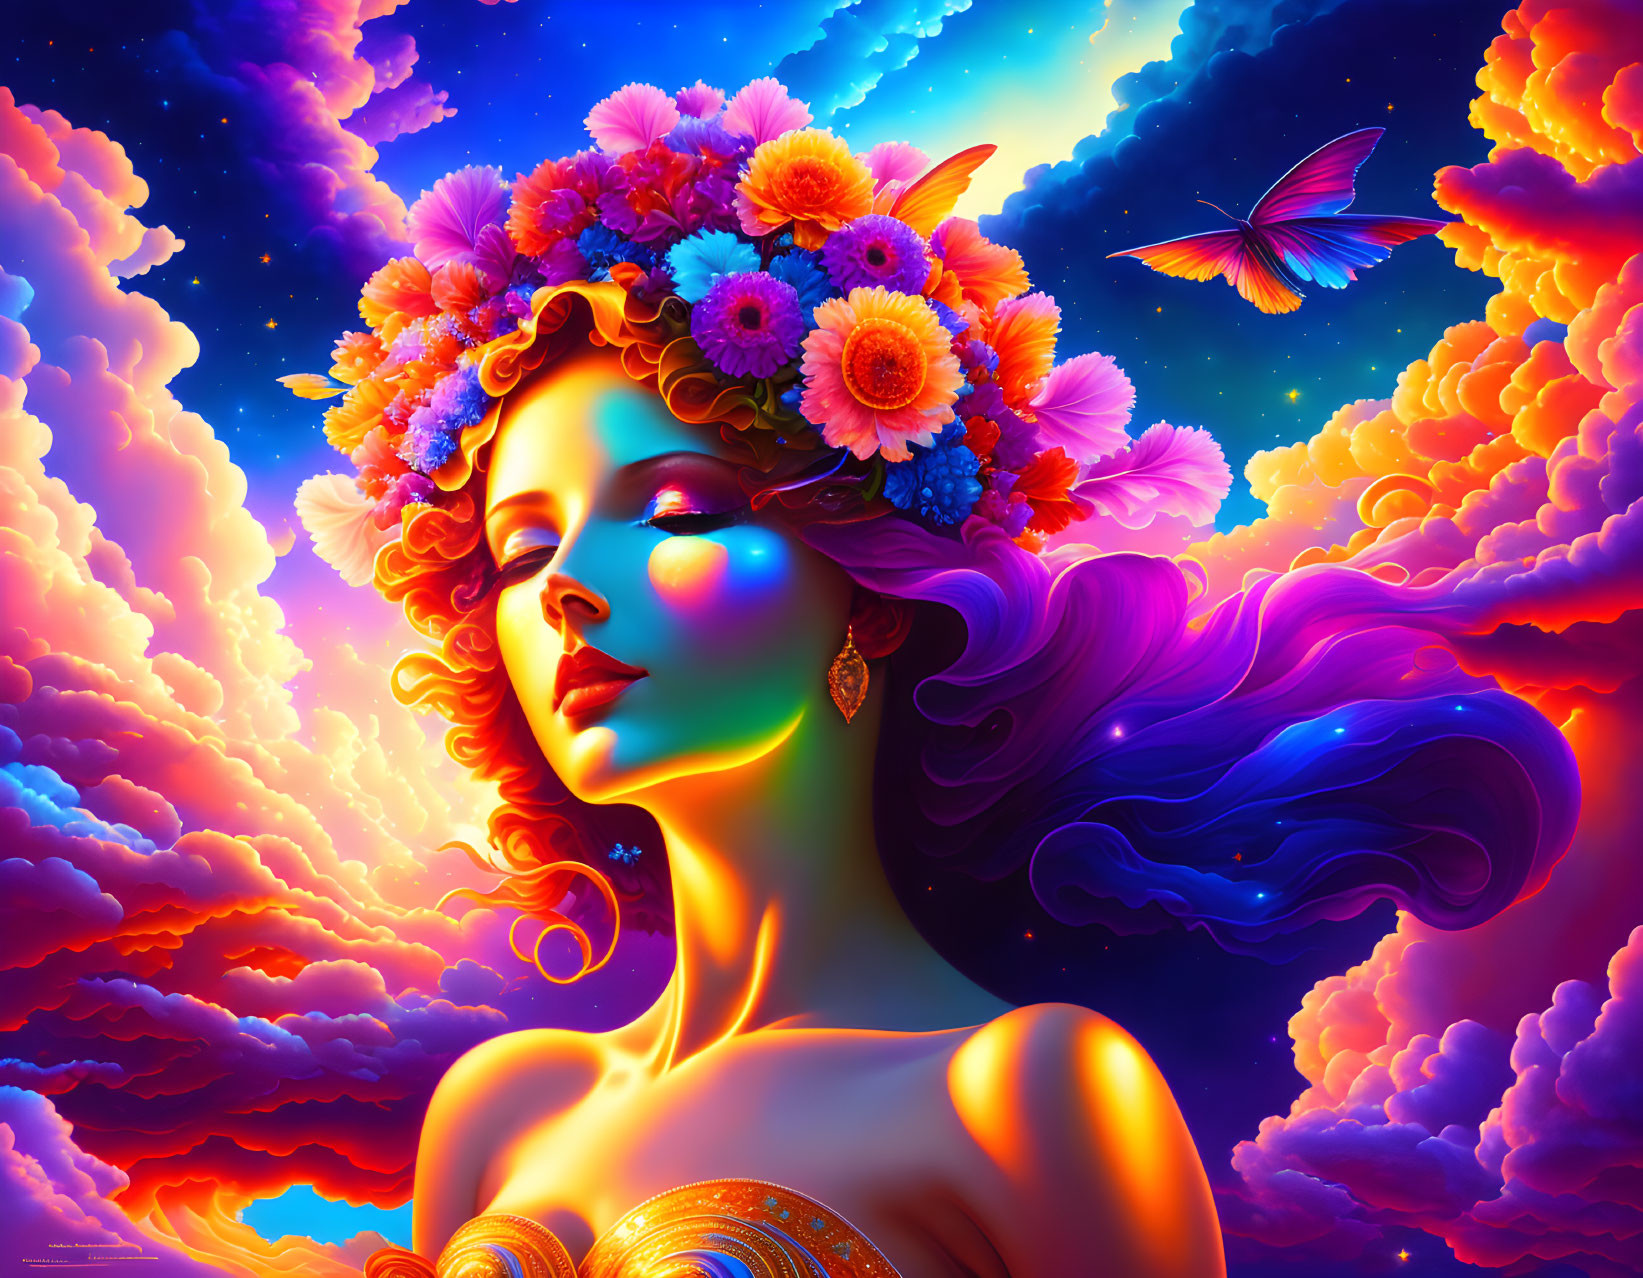 Colorful digital artwork of woman with floral hair and butterfly against vibrant clouds.